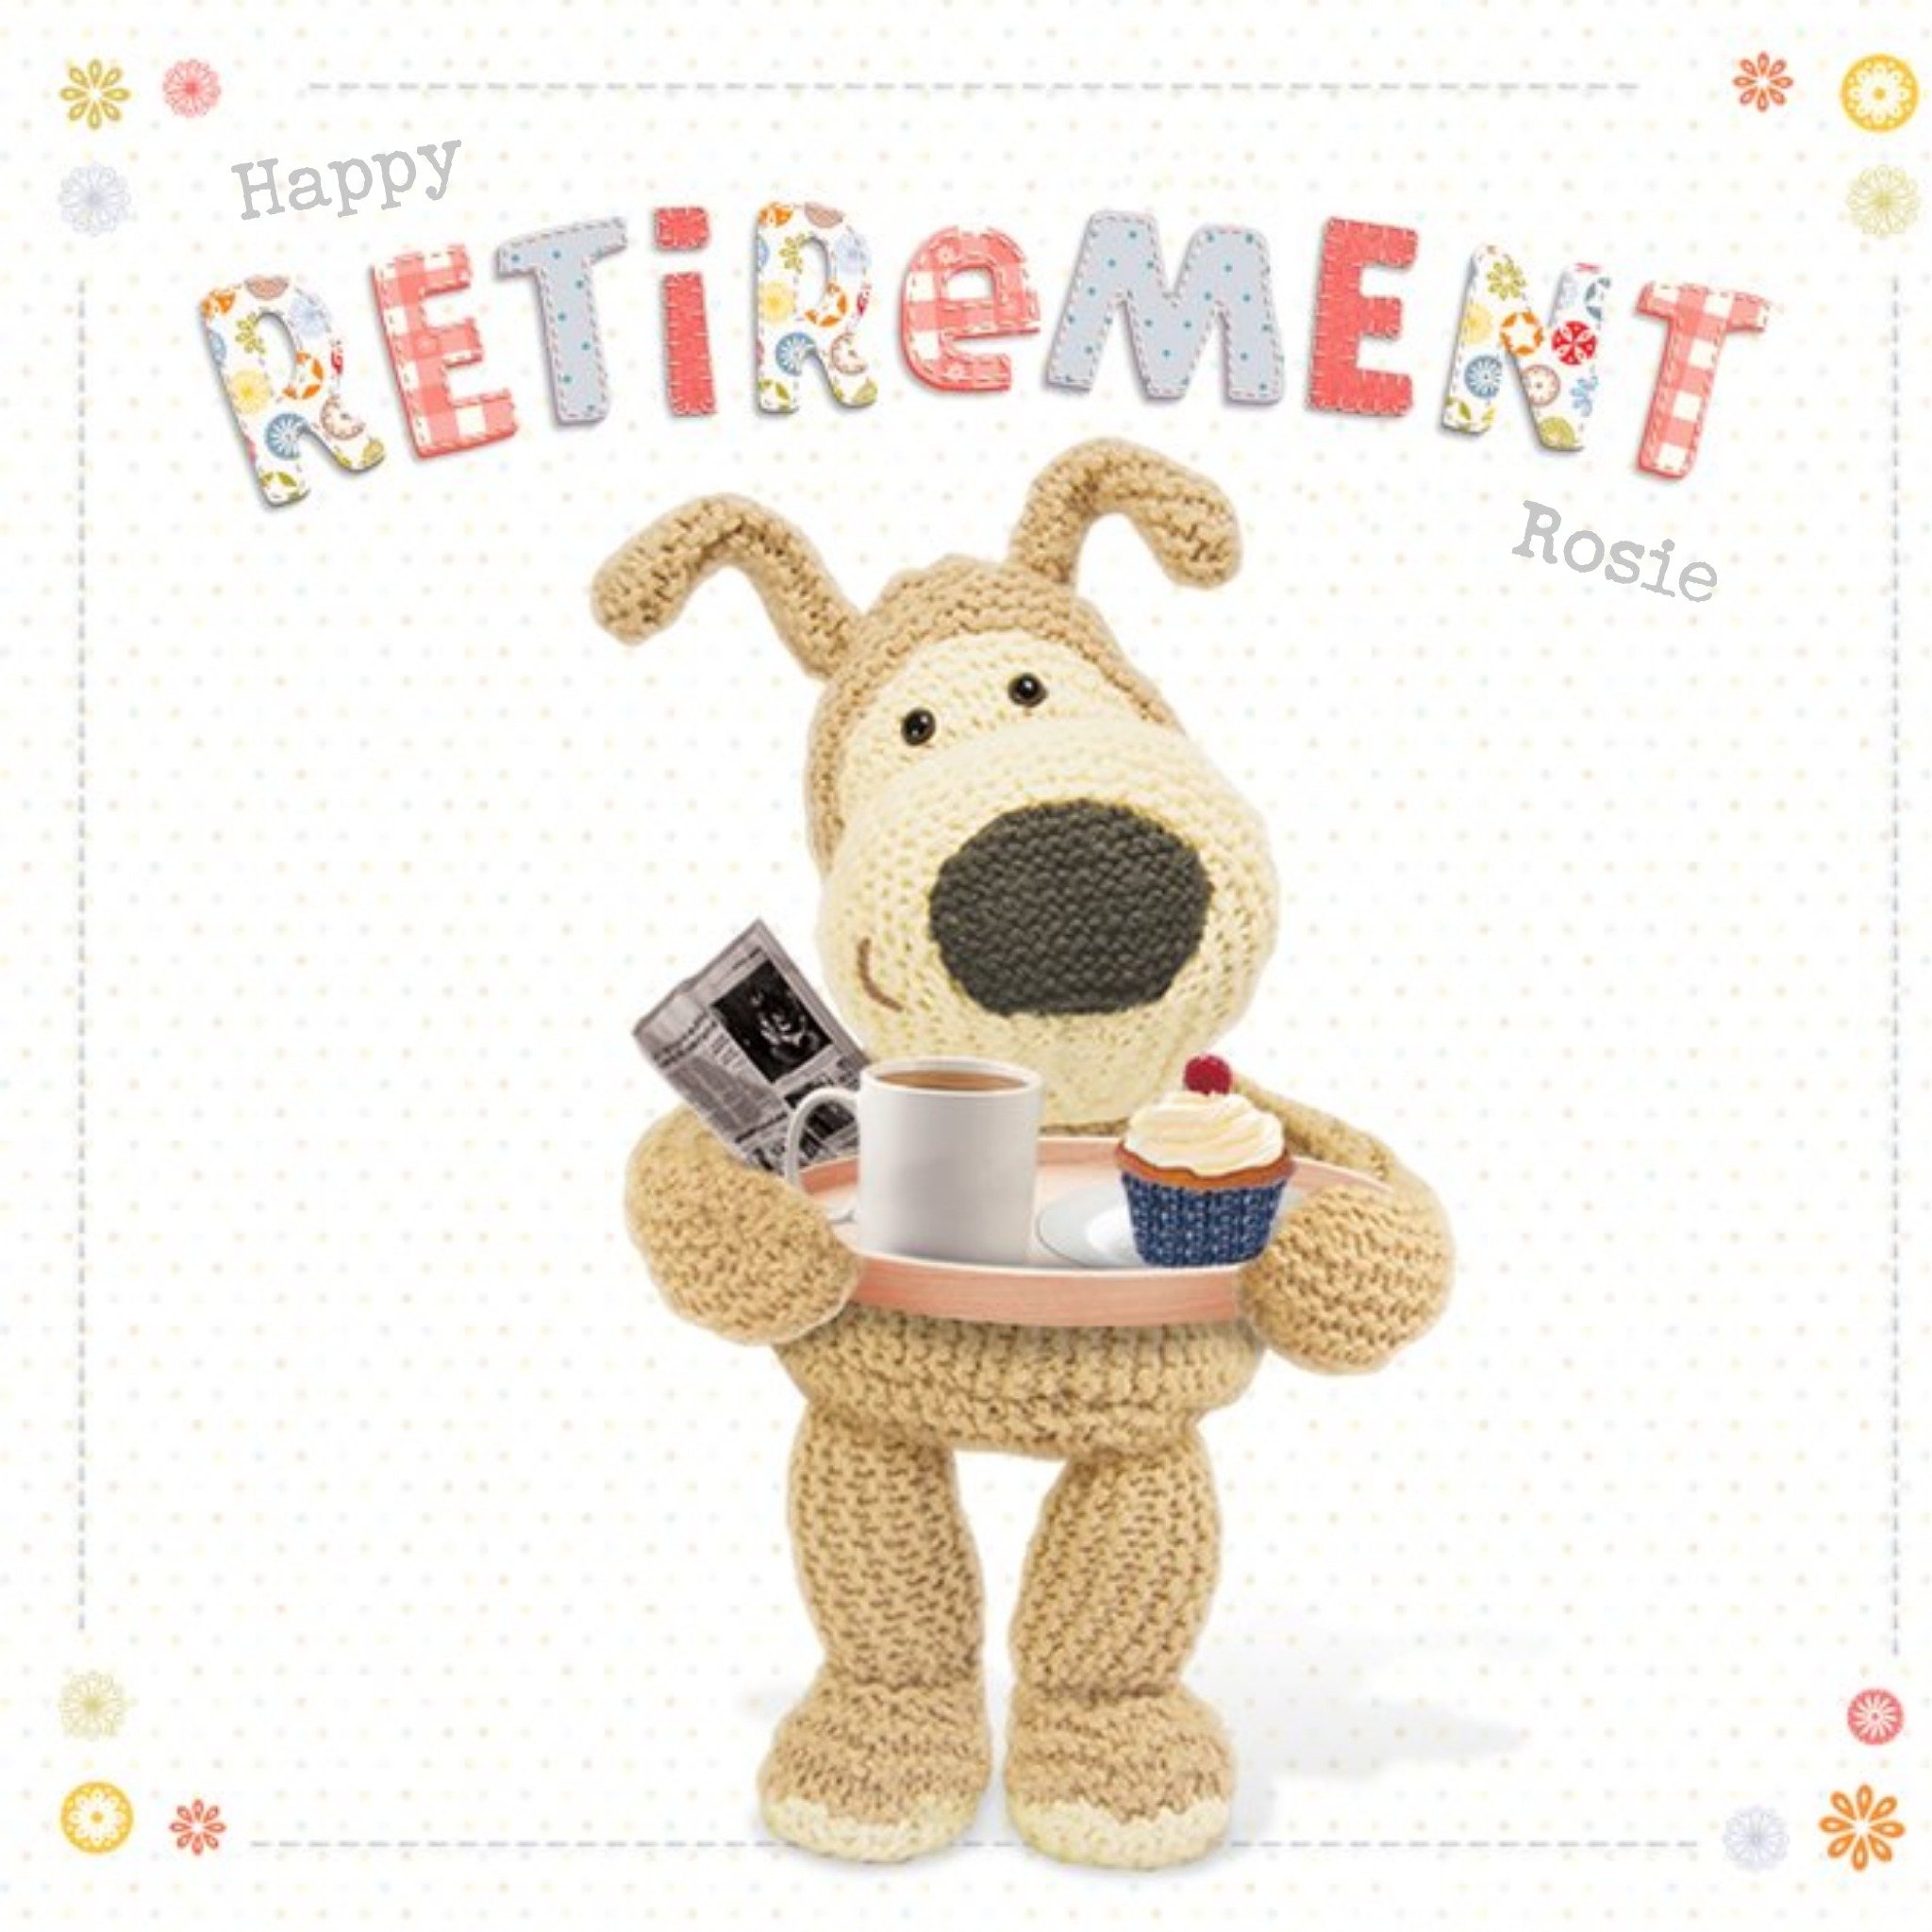 Boofle Personalised Happy Retirement Card, Large